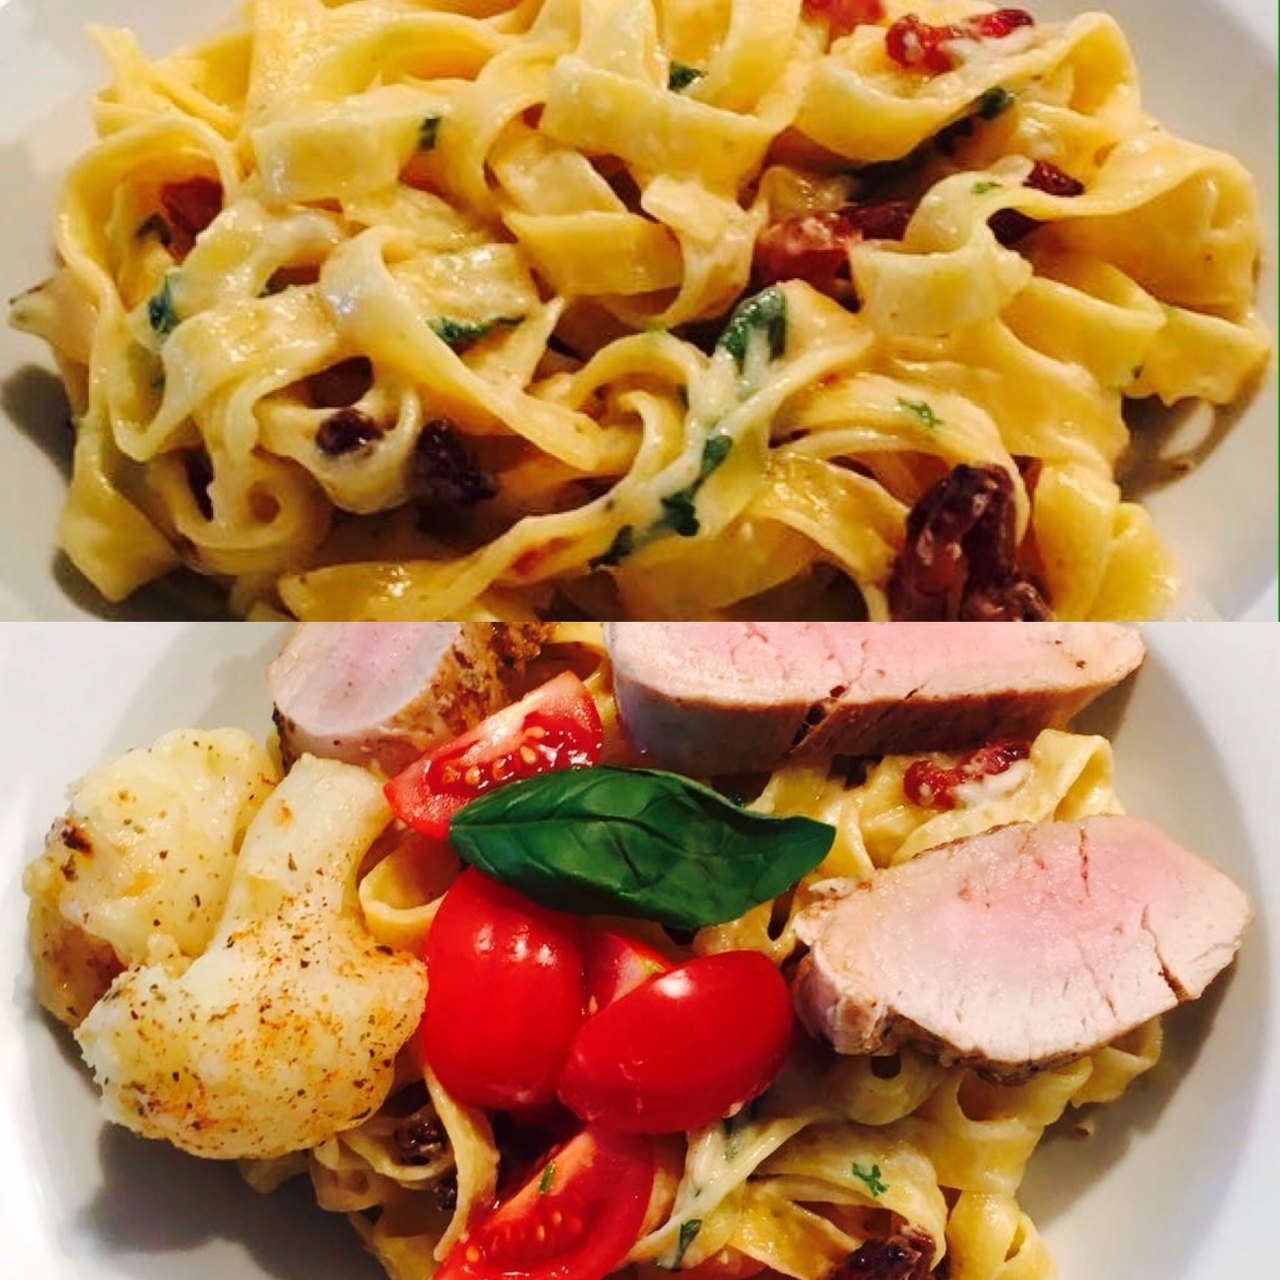 Tagliatelle with pork and bacon